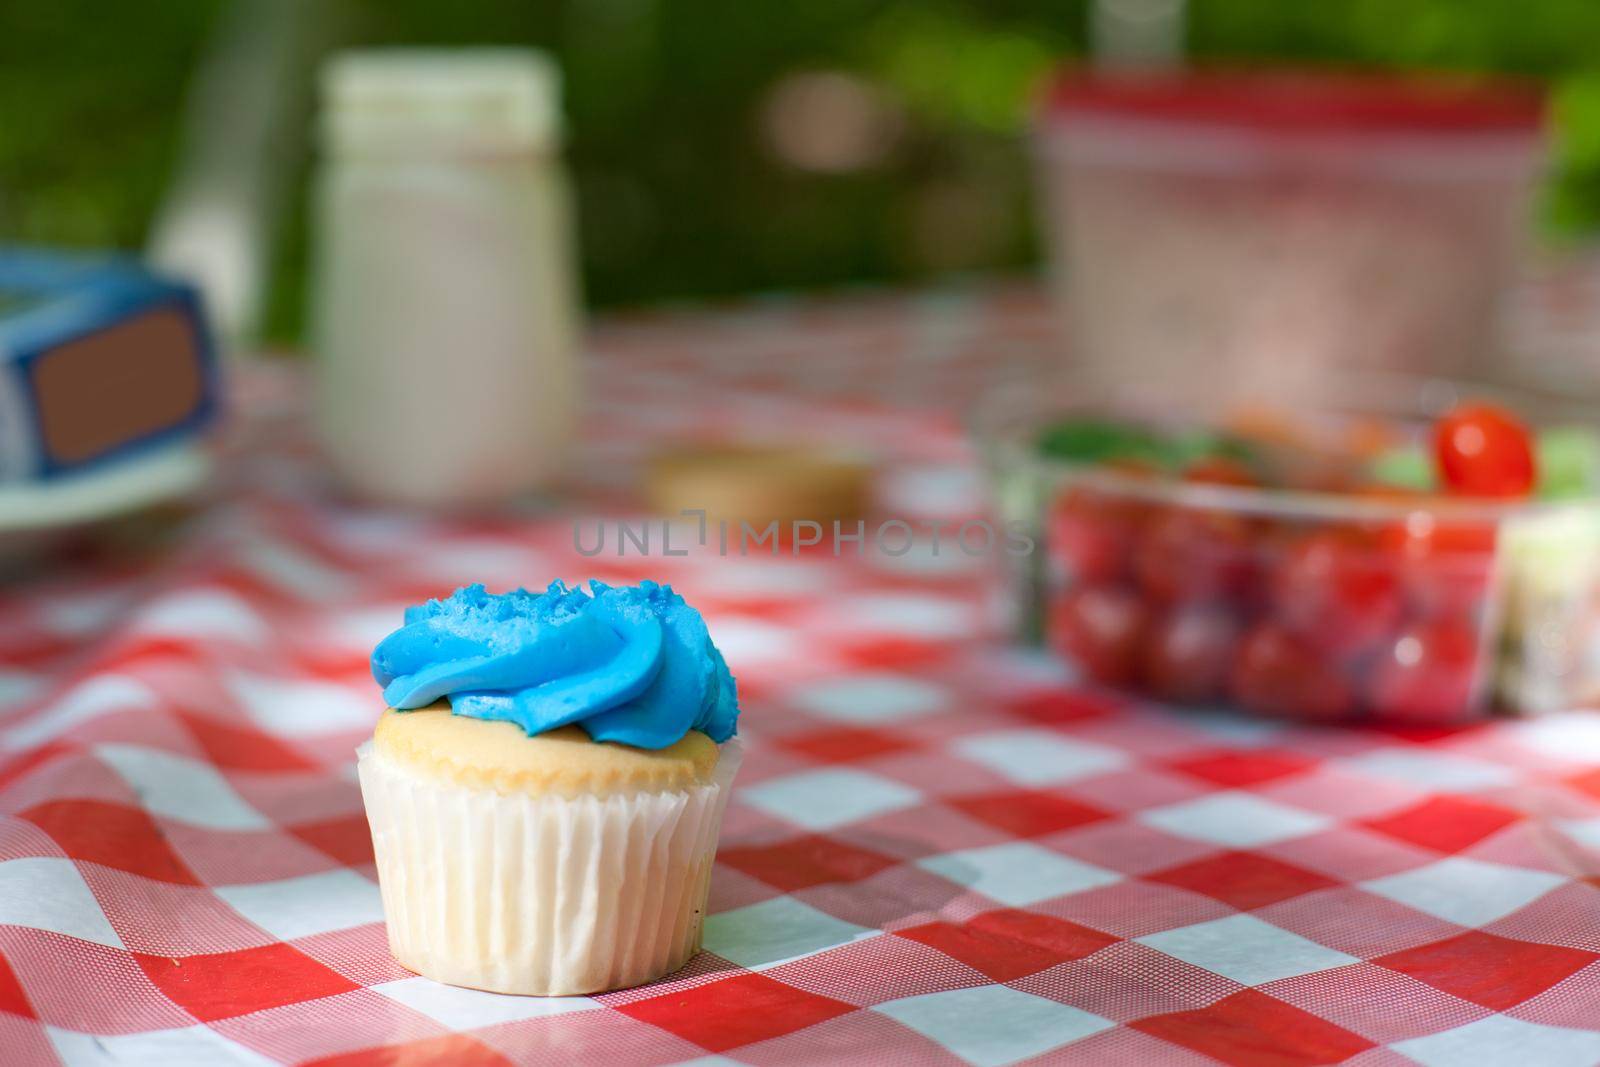 Sweet and crunchy- vegetables and a cupcake provide snacks for camping at a picnic table 